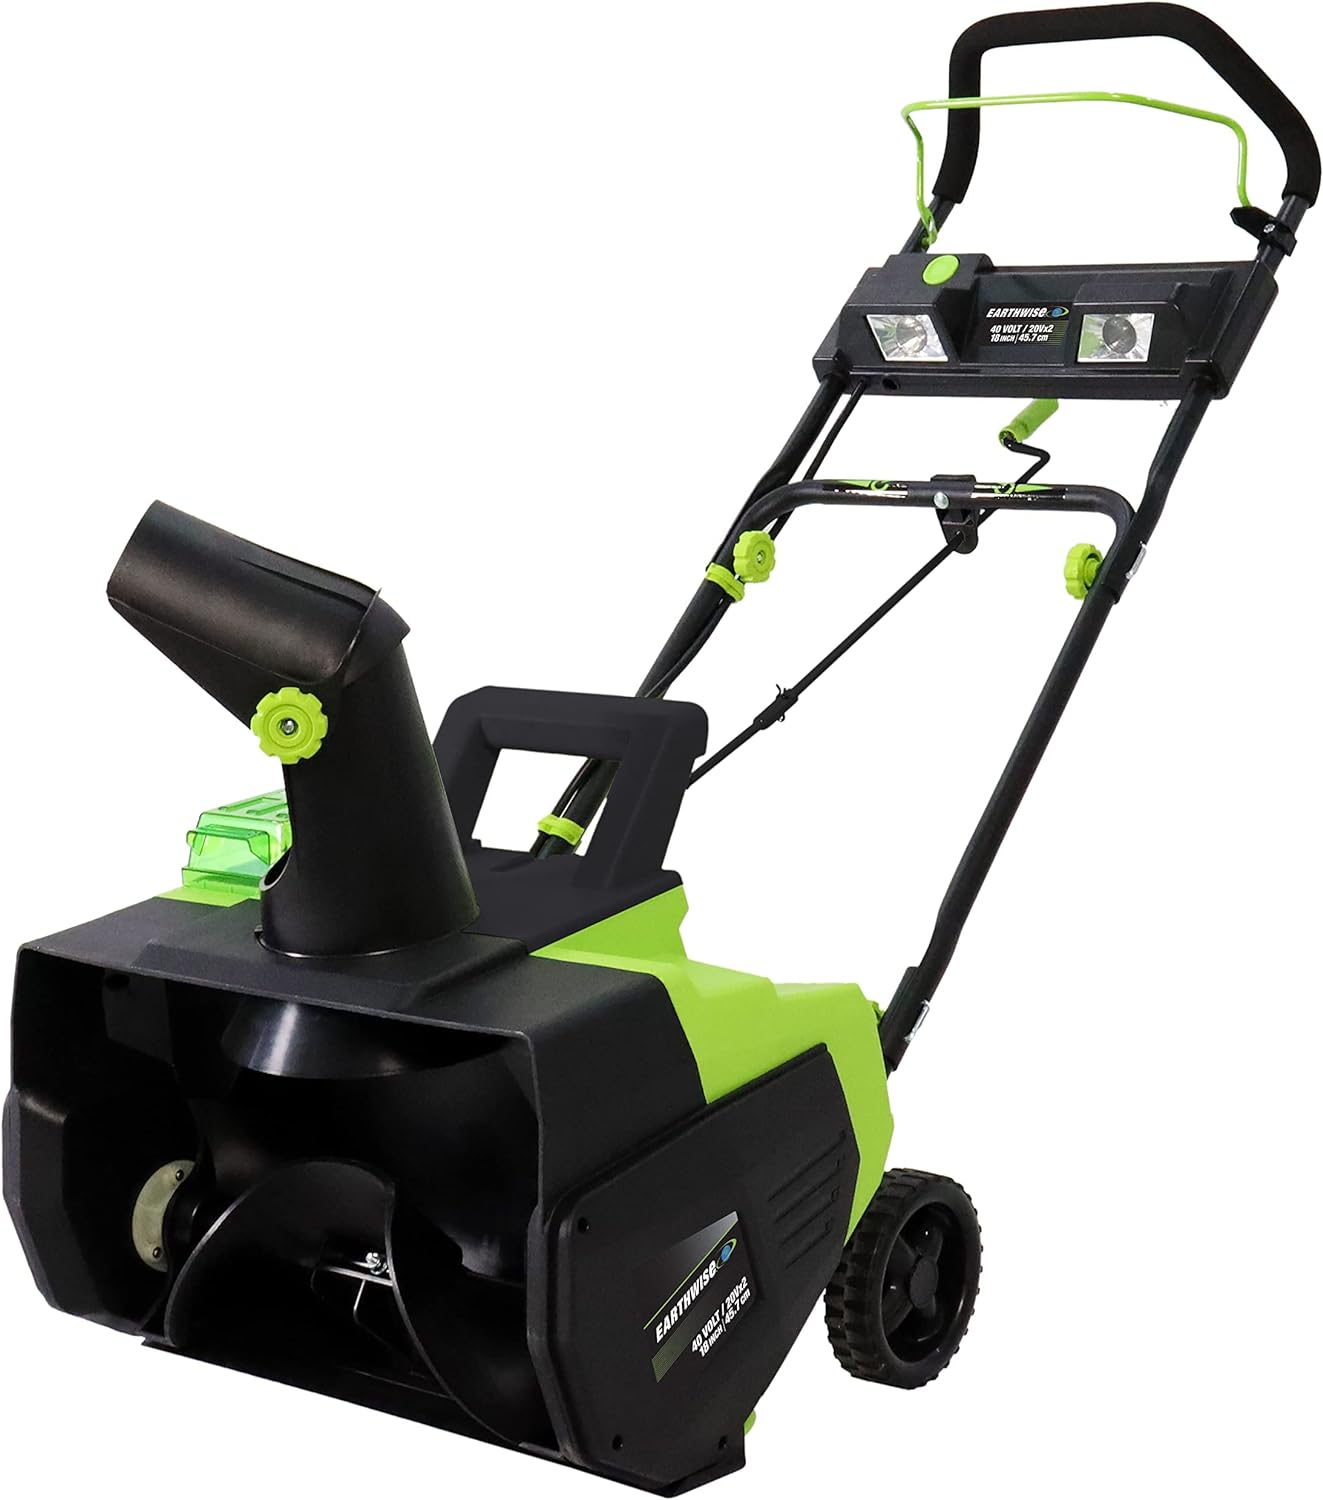 Earthwise SN722018 Snow Thrower Review